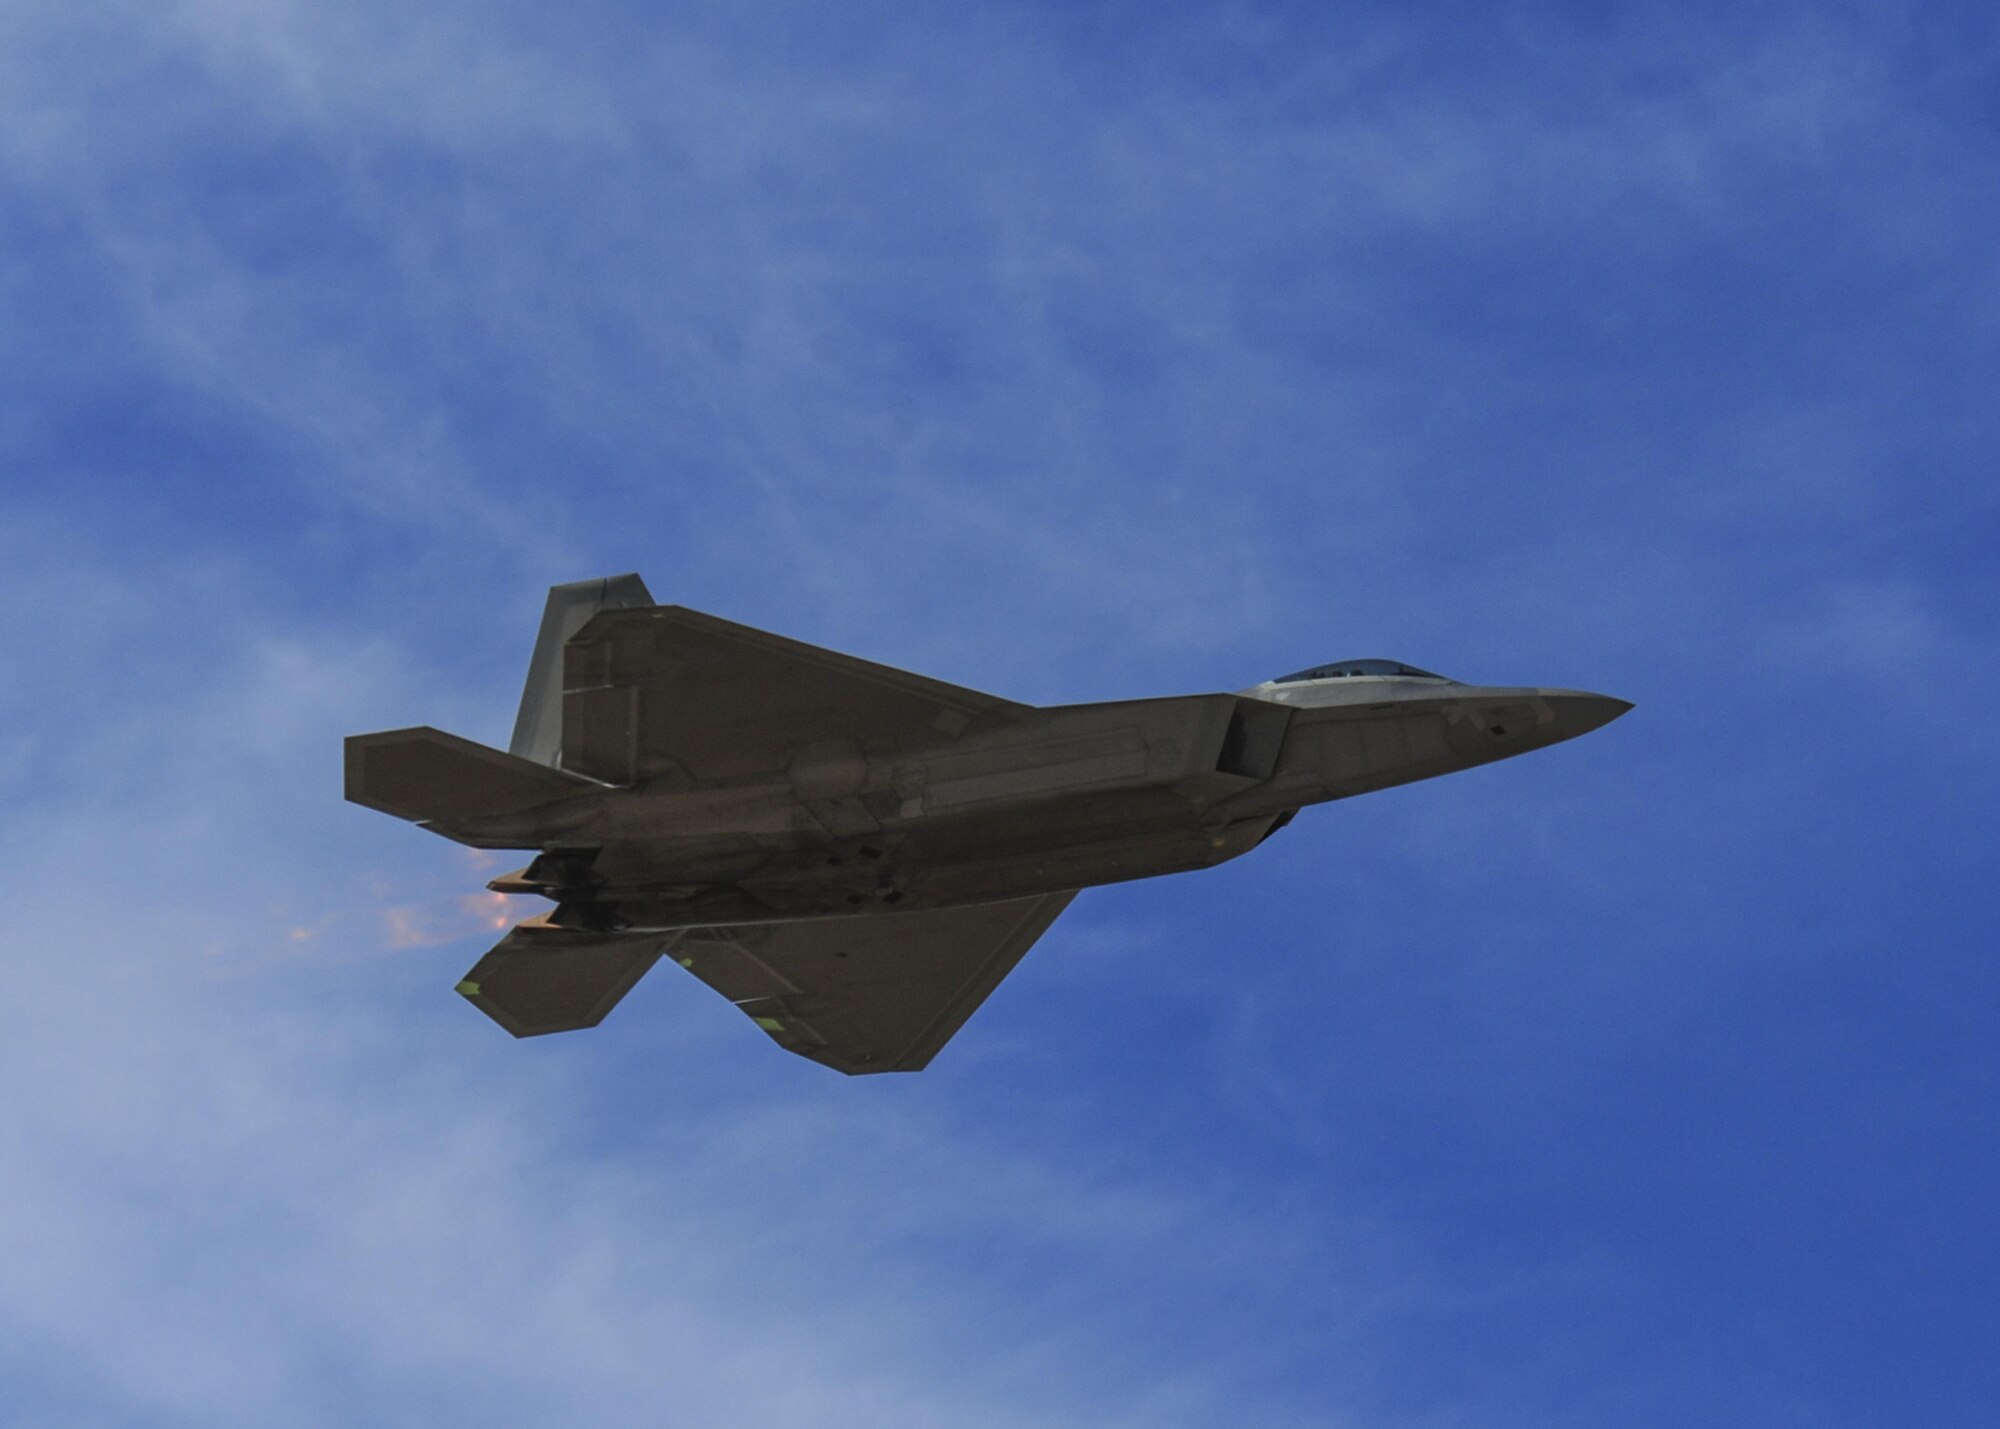 A U.S. Air Force F-22 Raptor flies overhead during the 2016 Heritage Flight Training and Certification Course at Davis-Monthan Air Force Base, Ariz., March 4, 2016. The Raptor performs both air-to-air and air-to-ground missions allowing full realization of operational concepts vital to the 21st century Air Force. (U.S. Air Force photo by Senior Airman Chris Massey/Released)